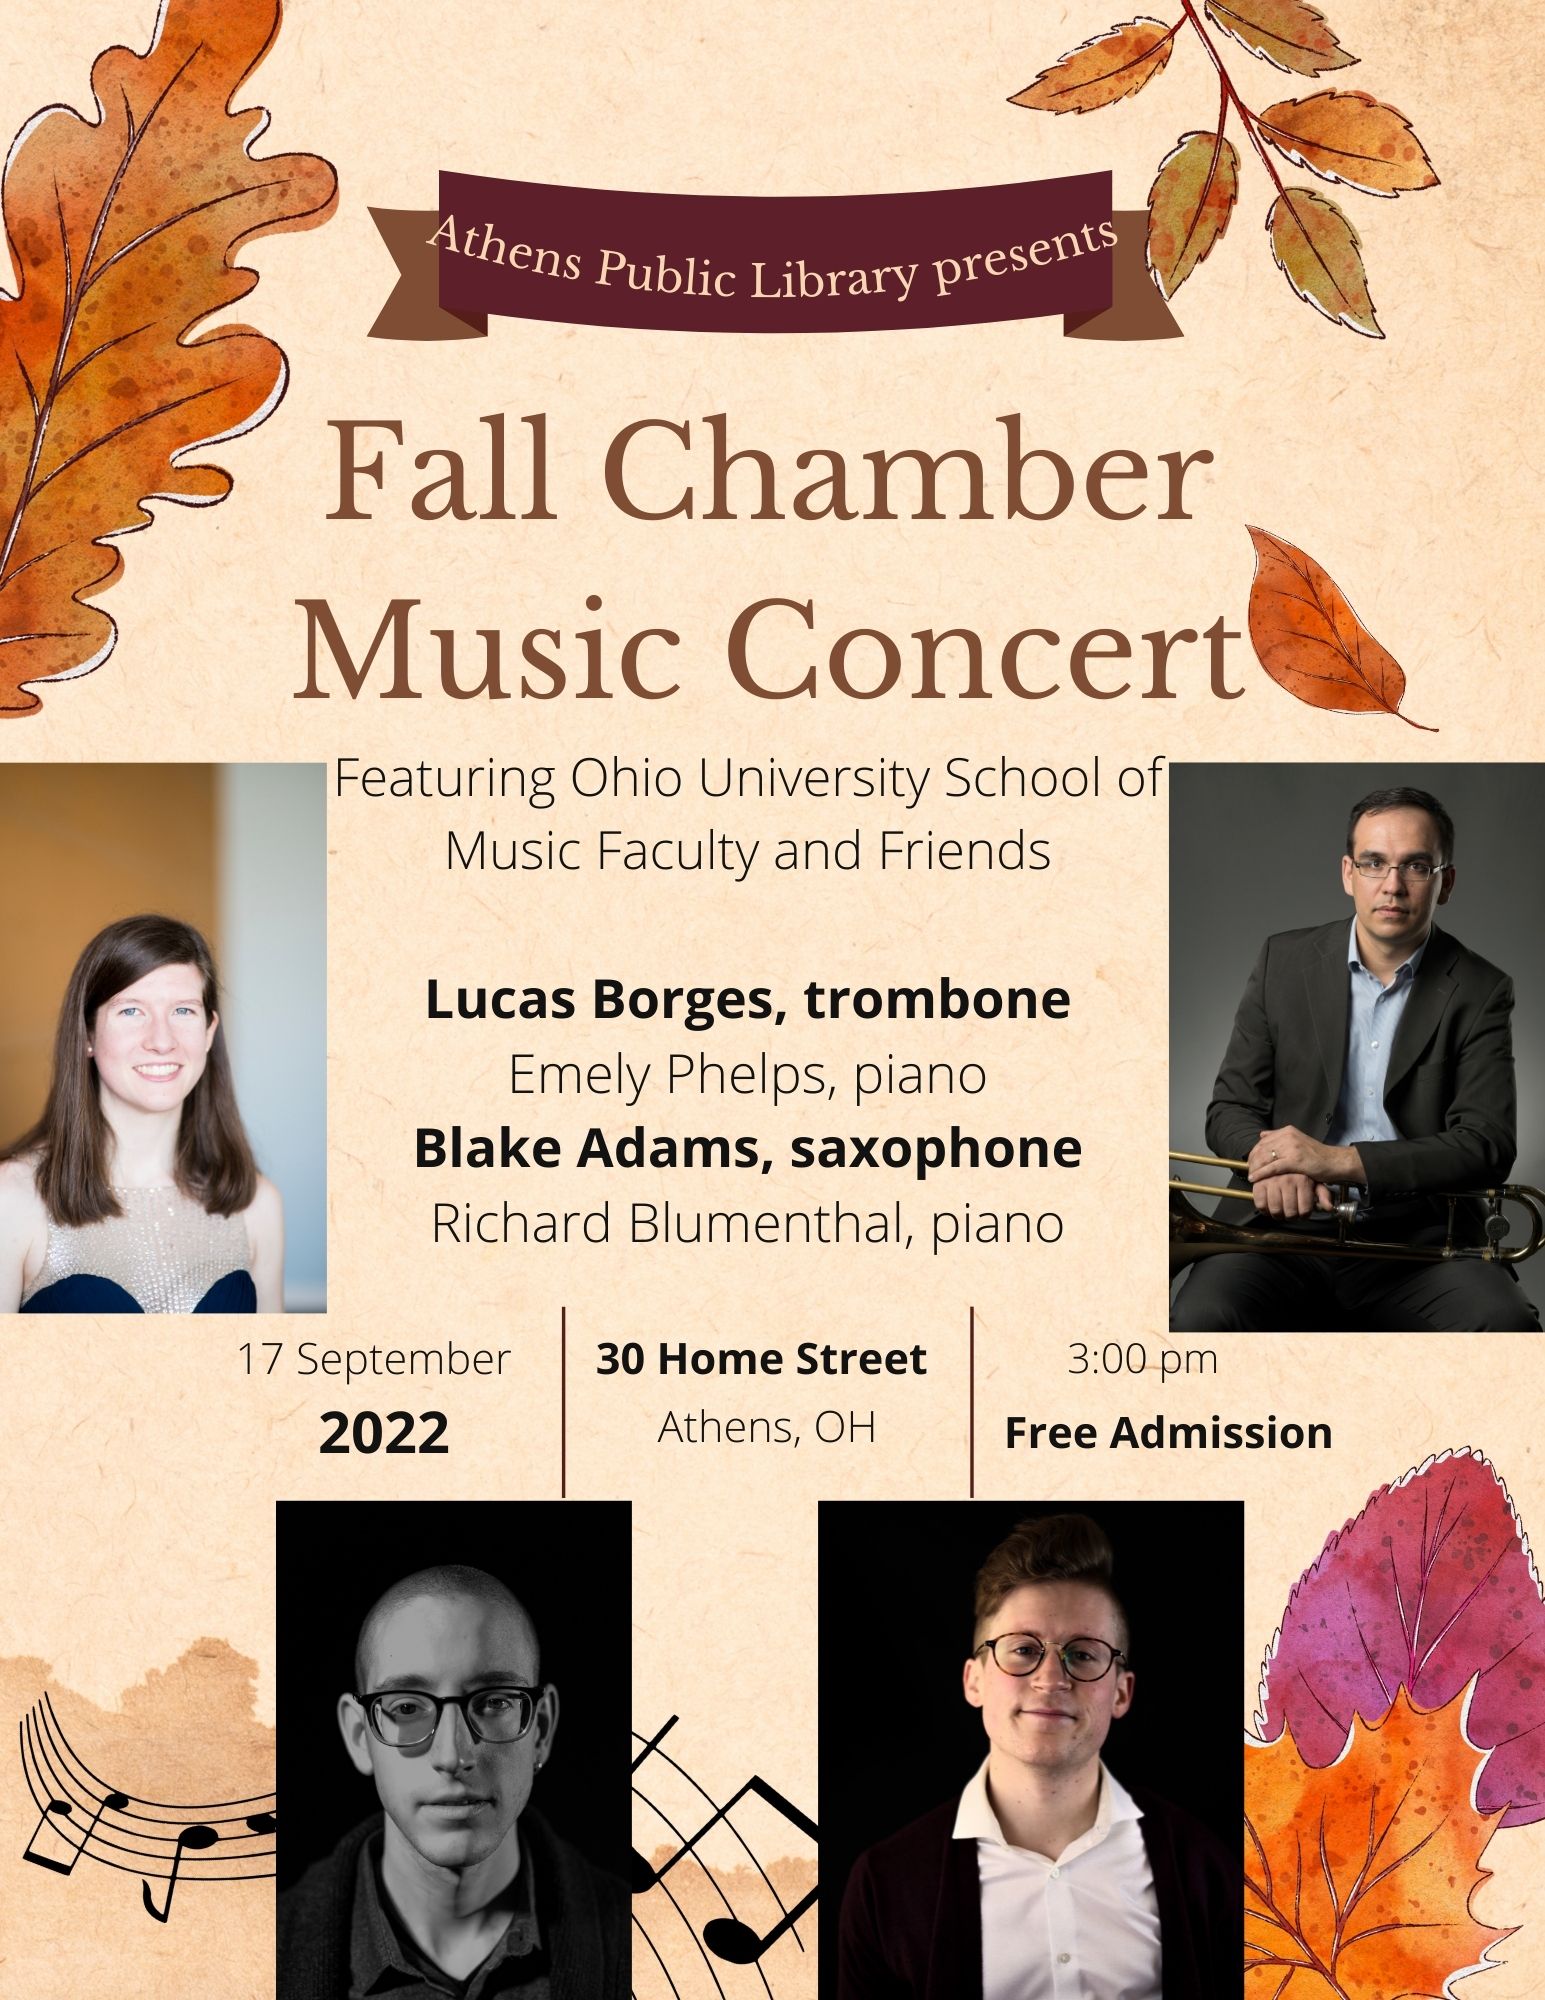 A flyer reading: Athens Public Library presents Fall Chamber Music Concert featuring Ohio University School of Music Faculty and Friends. Lucas Borges, trombone, Emely Phelps, piano, Blake Adams, saxophone, Richard Blumenthal, piano. 17 September 2022, 30 home Street Athens, OH, 3 p.m. free admission. The flyer has pictures of all four of the musicians.